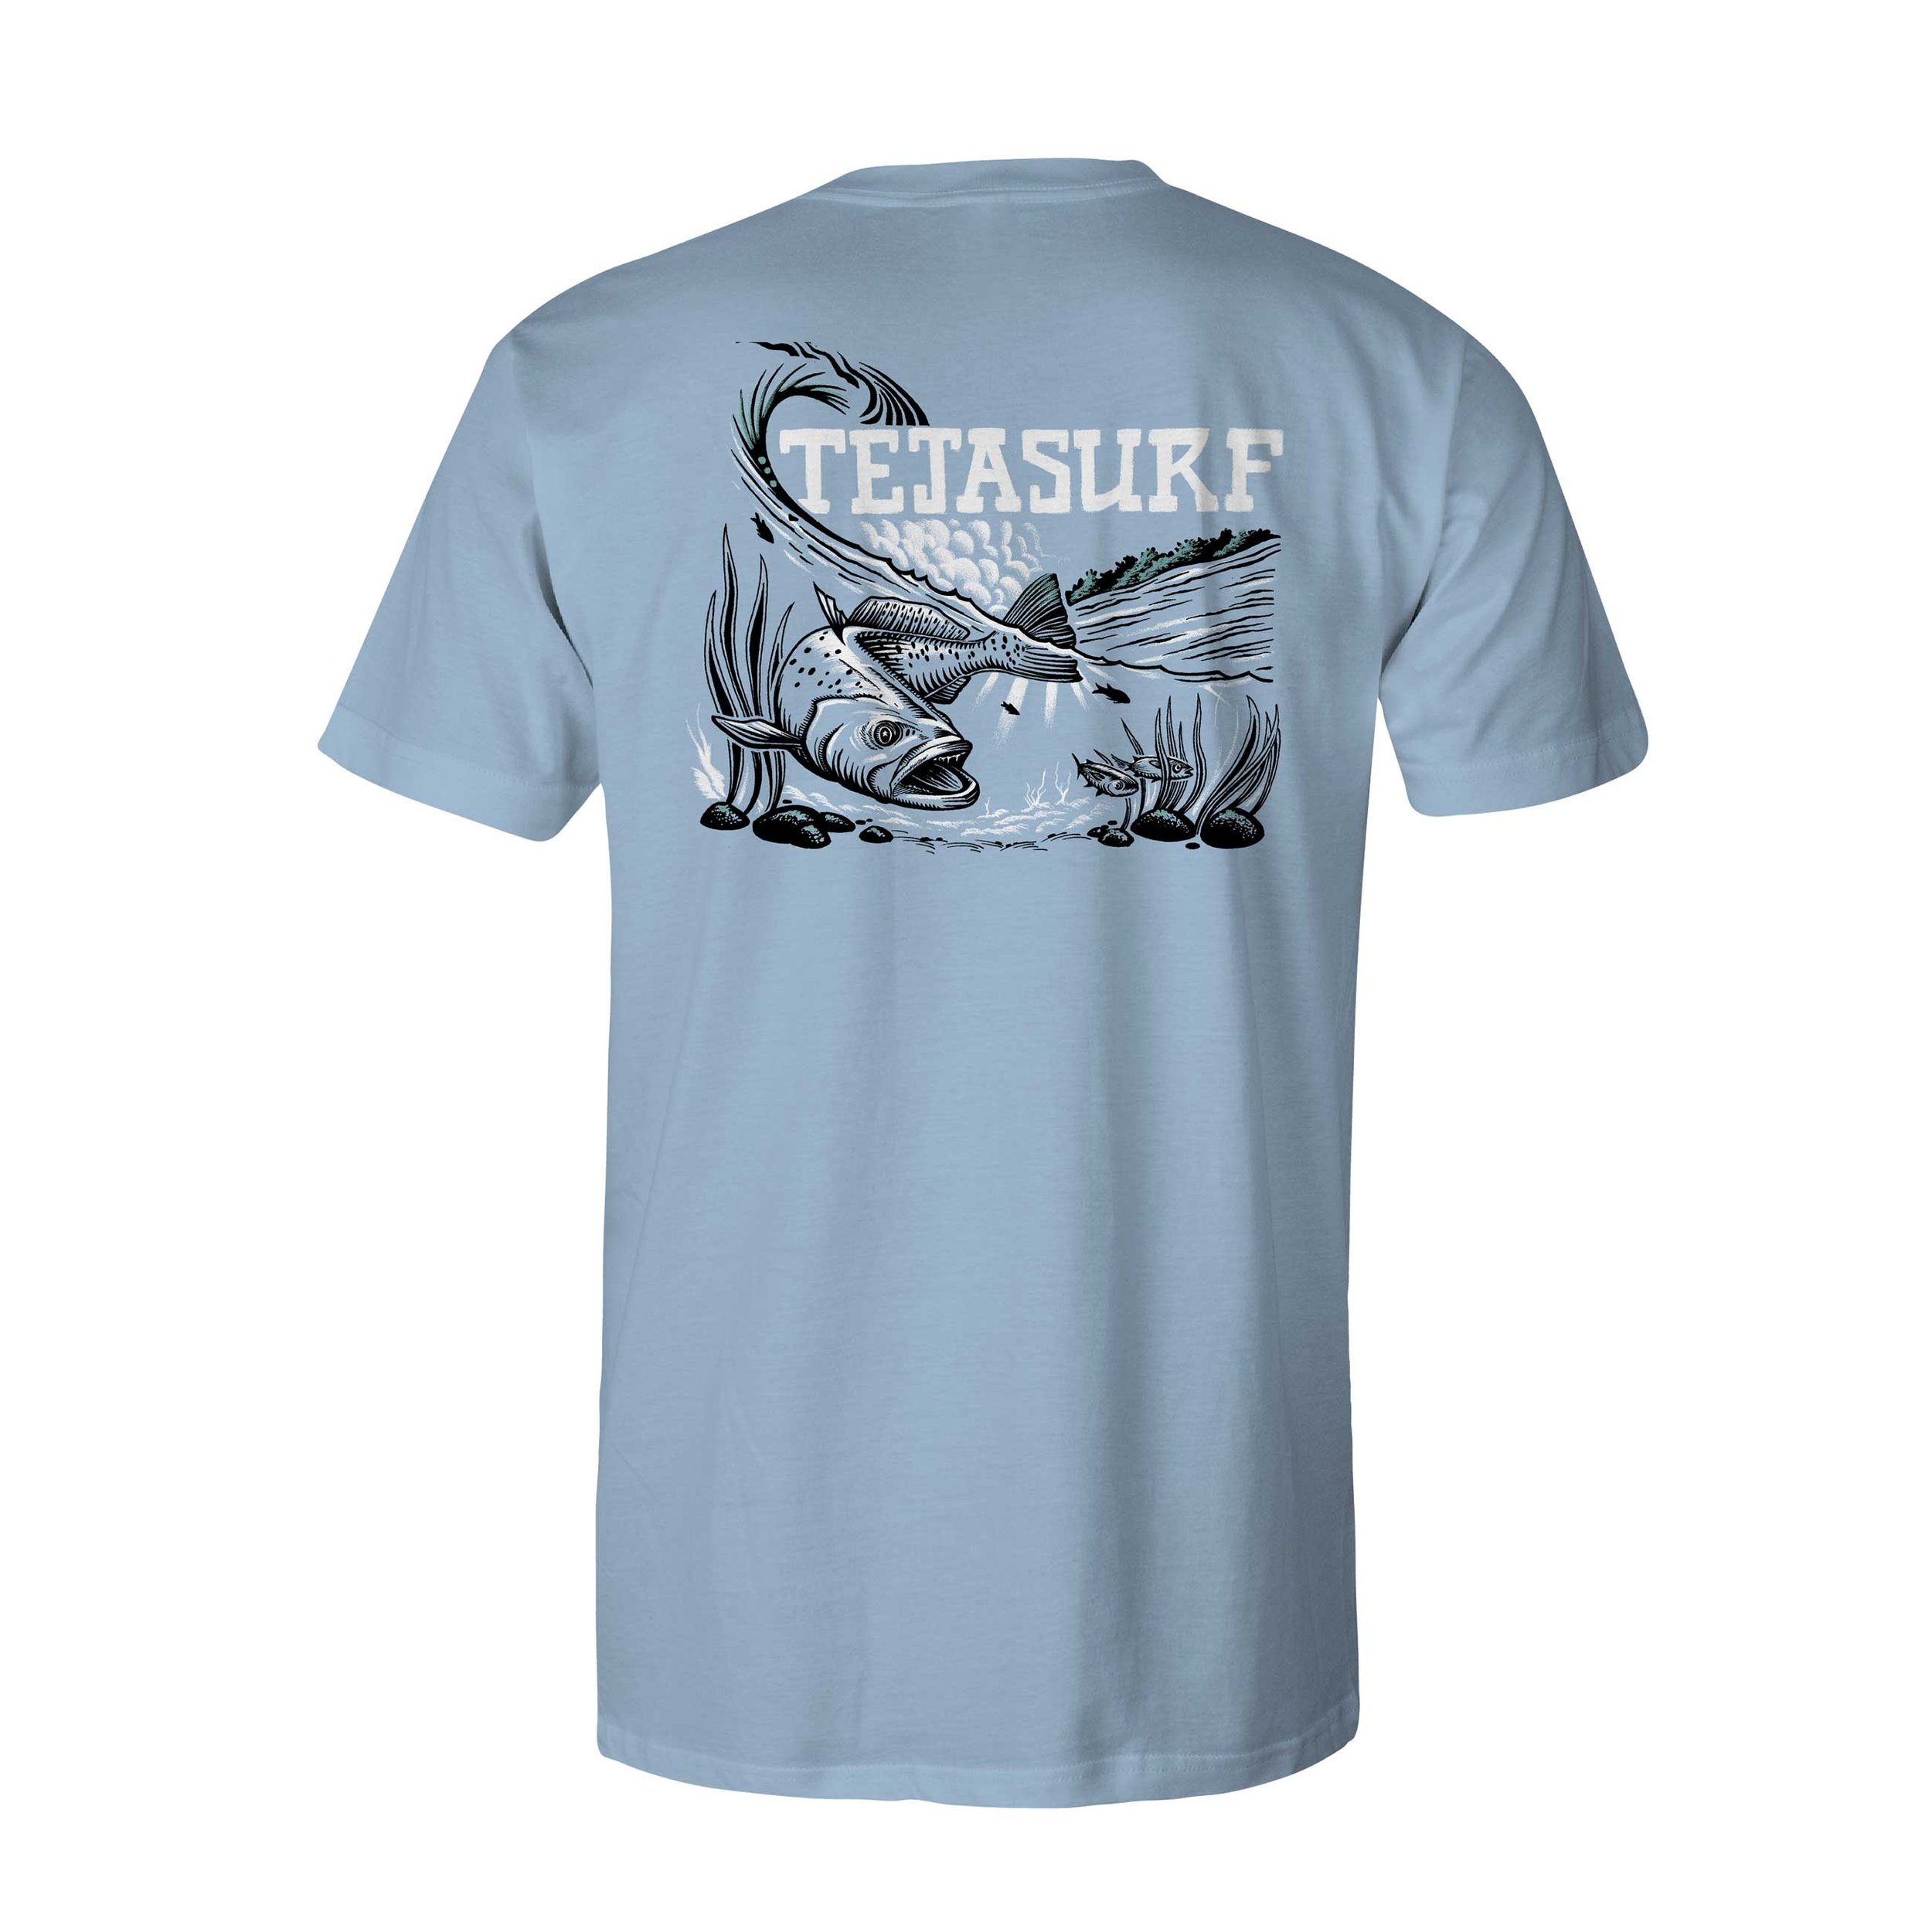 Speckled Trout T-Shirt — TEJASURF  We sell Texas surf and coastal t-shirts